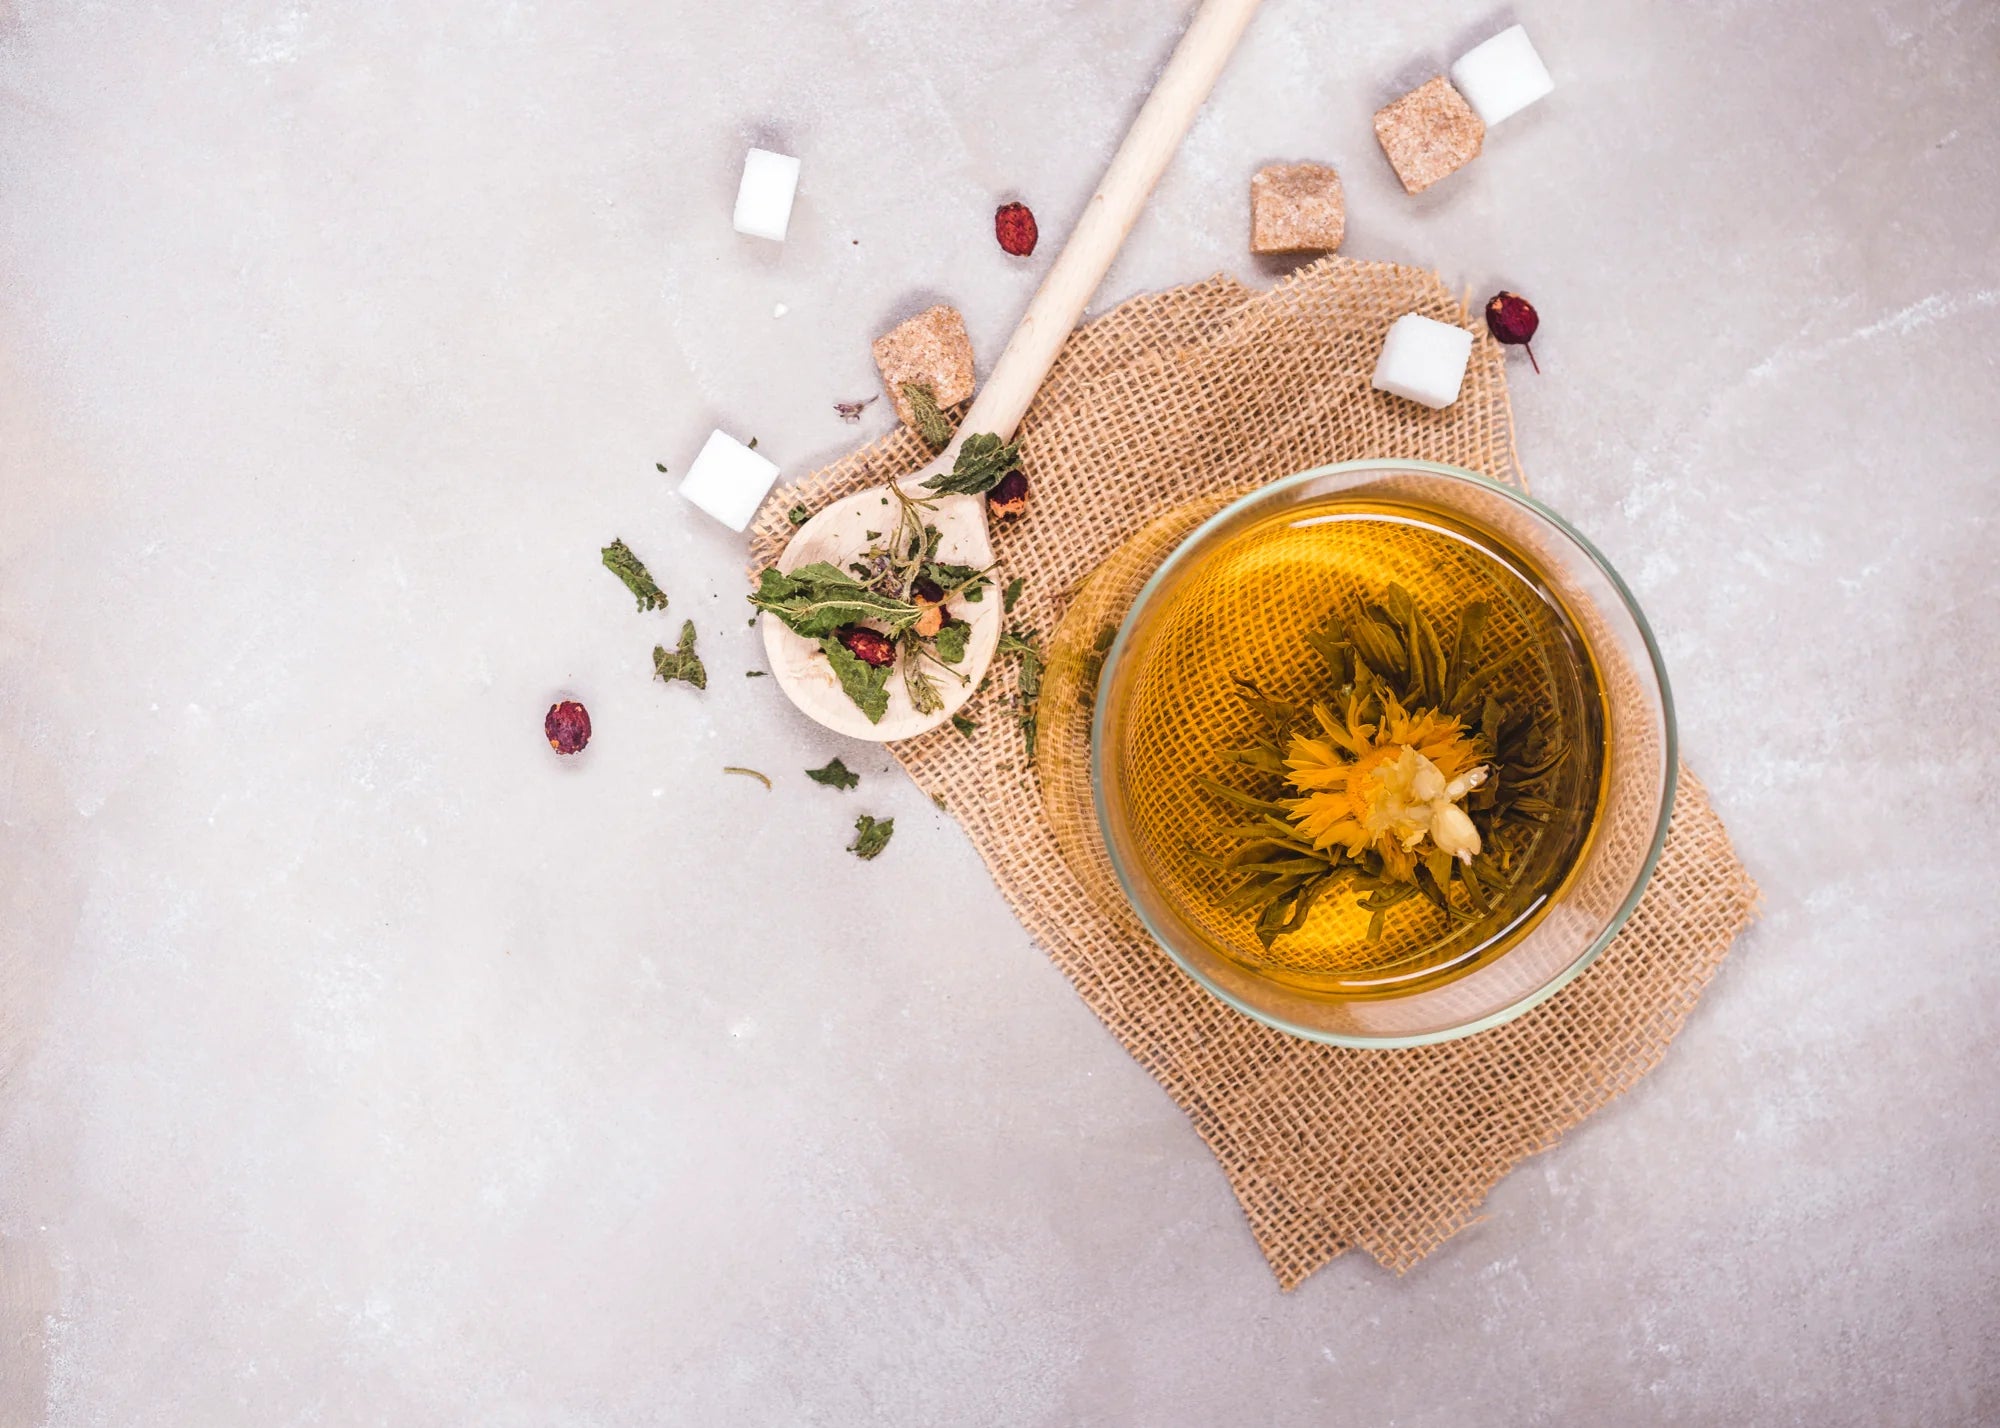 Chamomile Tea: Give life more Flavours